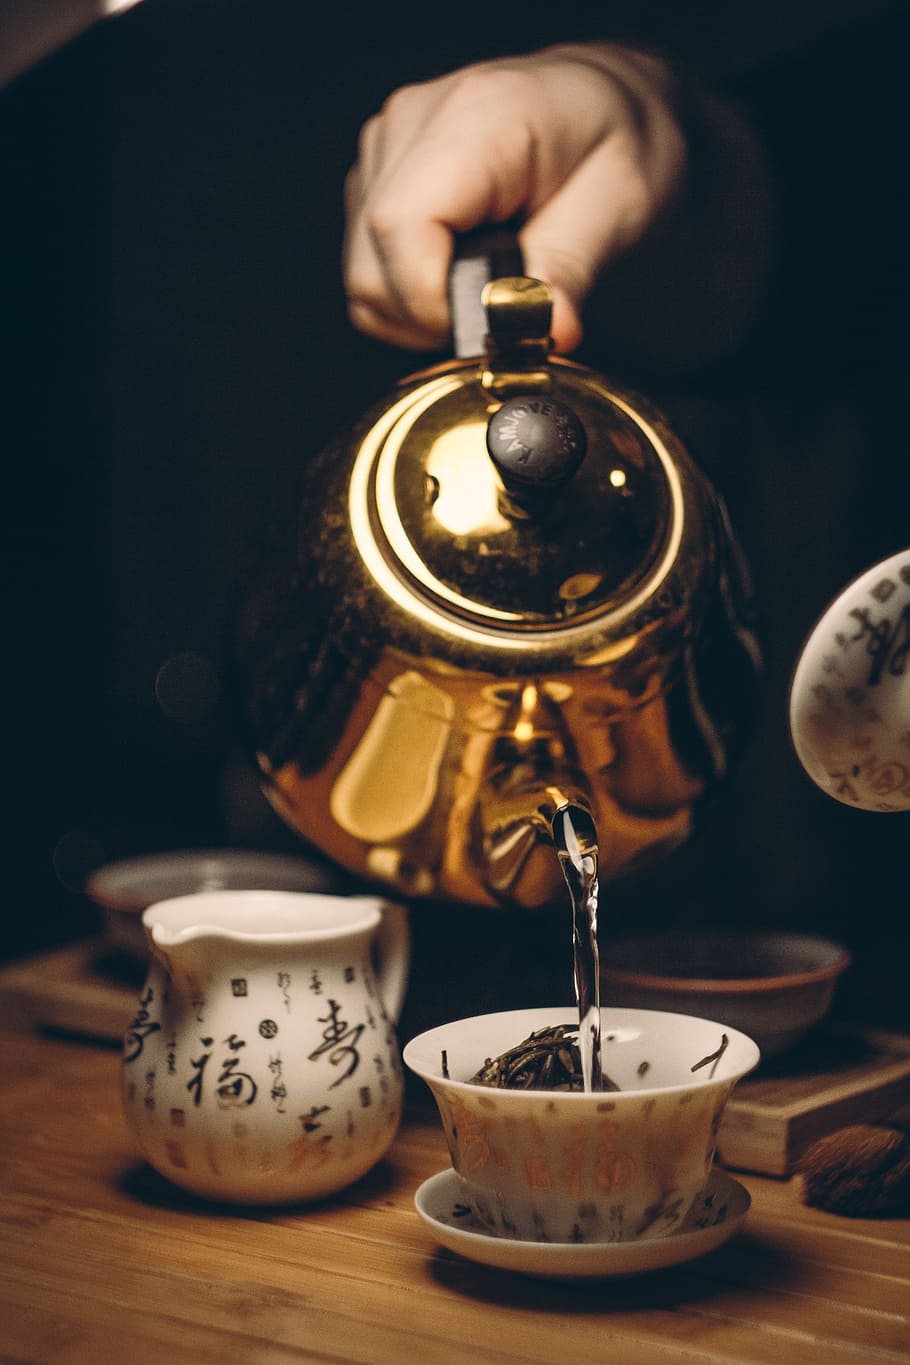 person, holding, brass kettle, white, teacup, saucer, beverage, breakfast, caffeine, cup